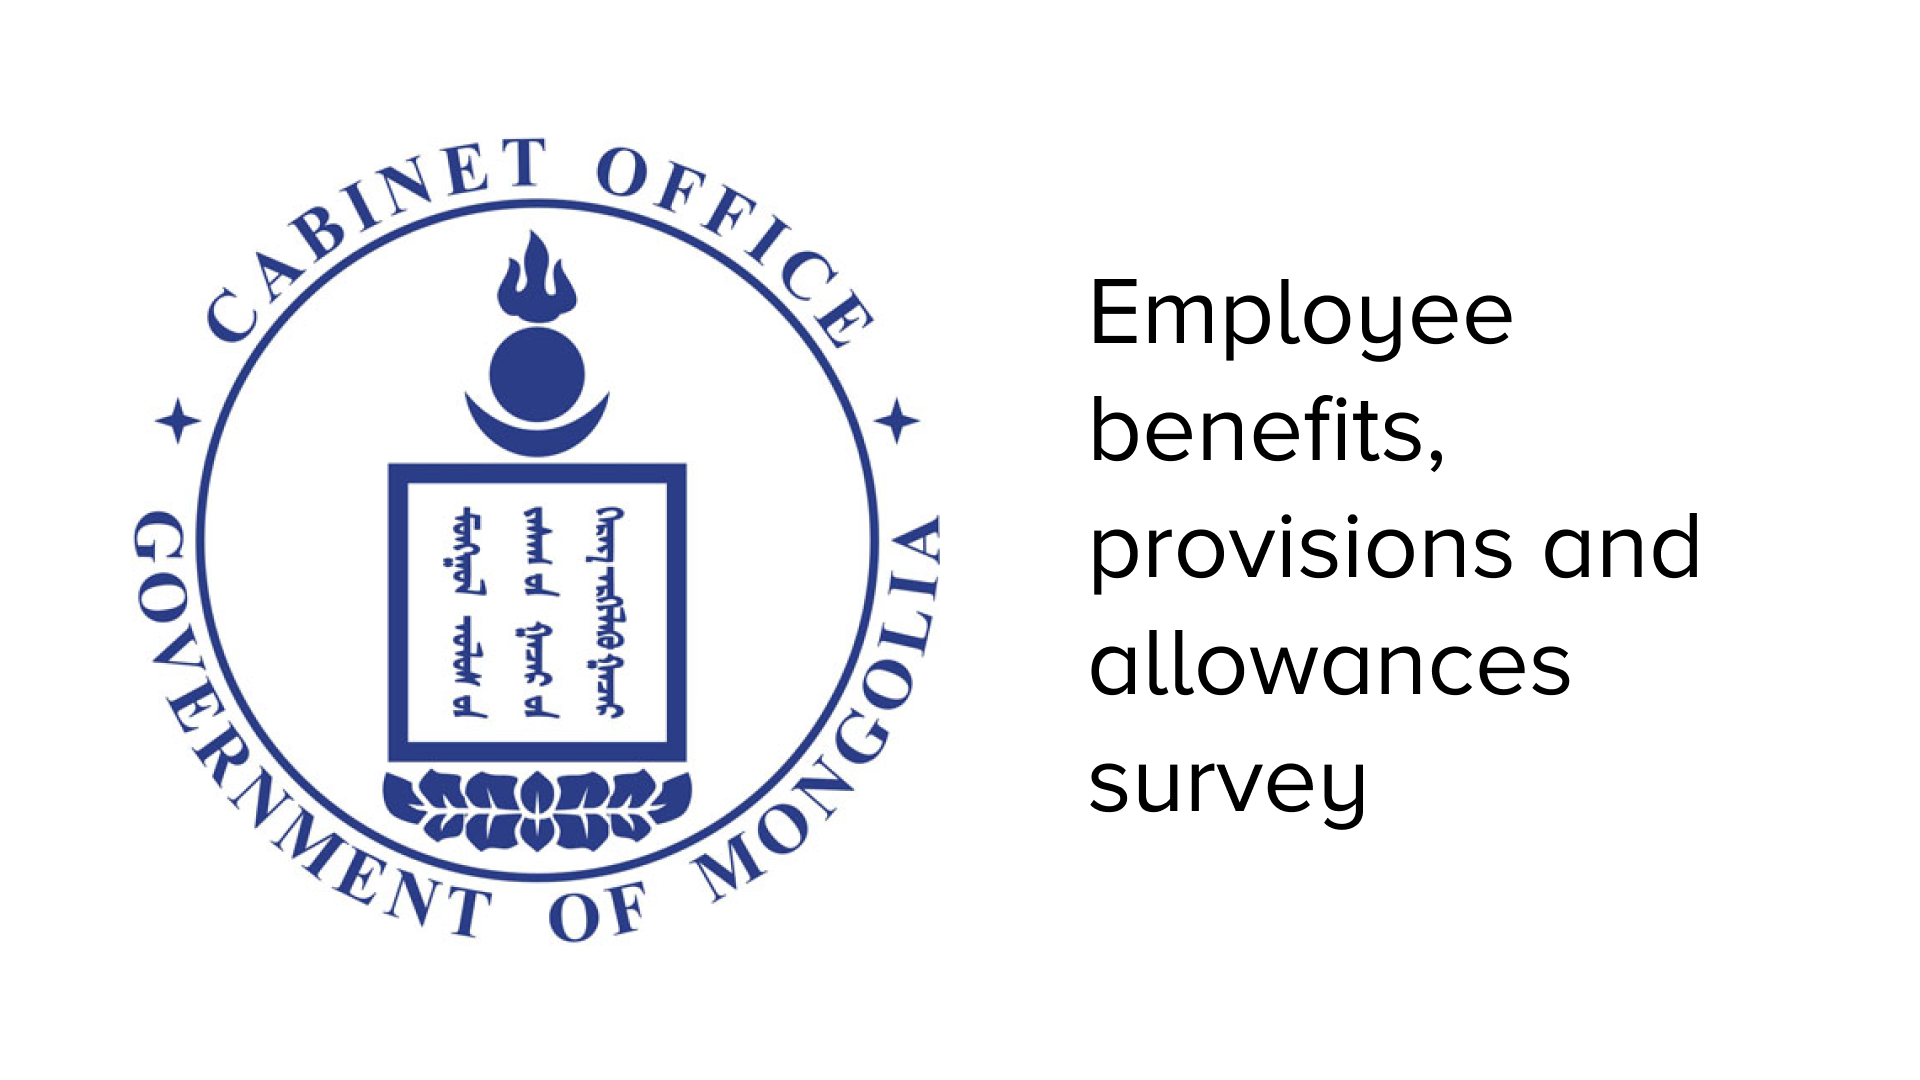 Employee benefits, provisions and allowances survey